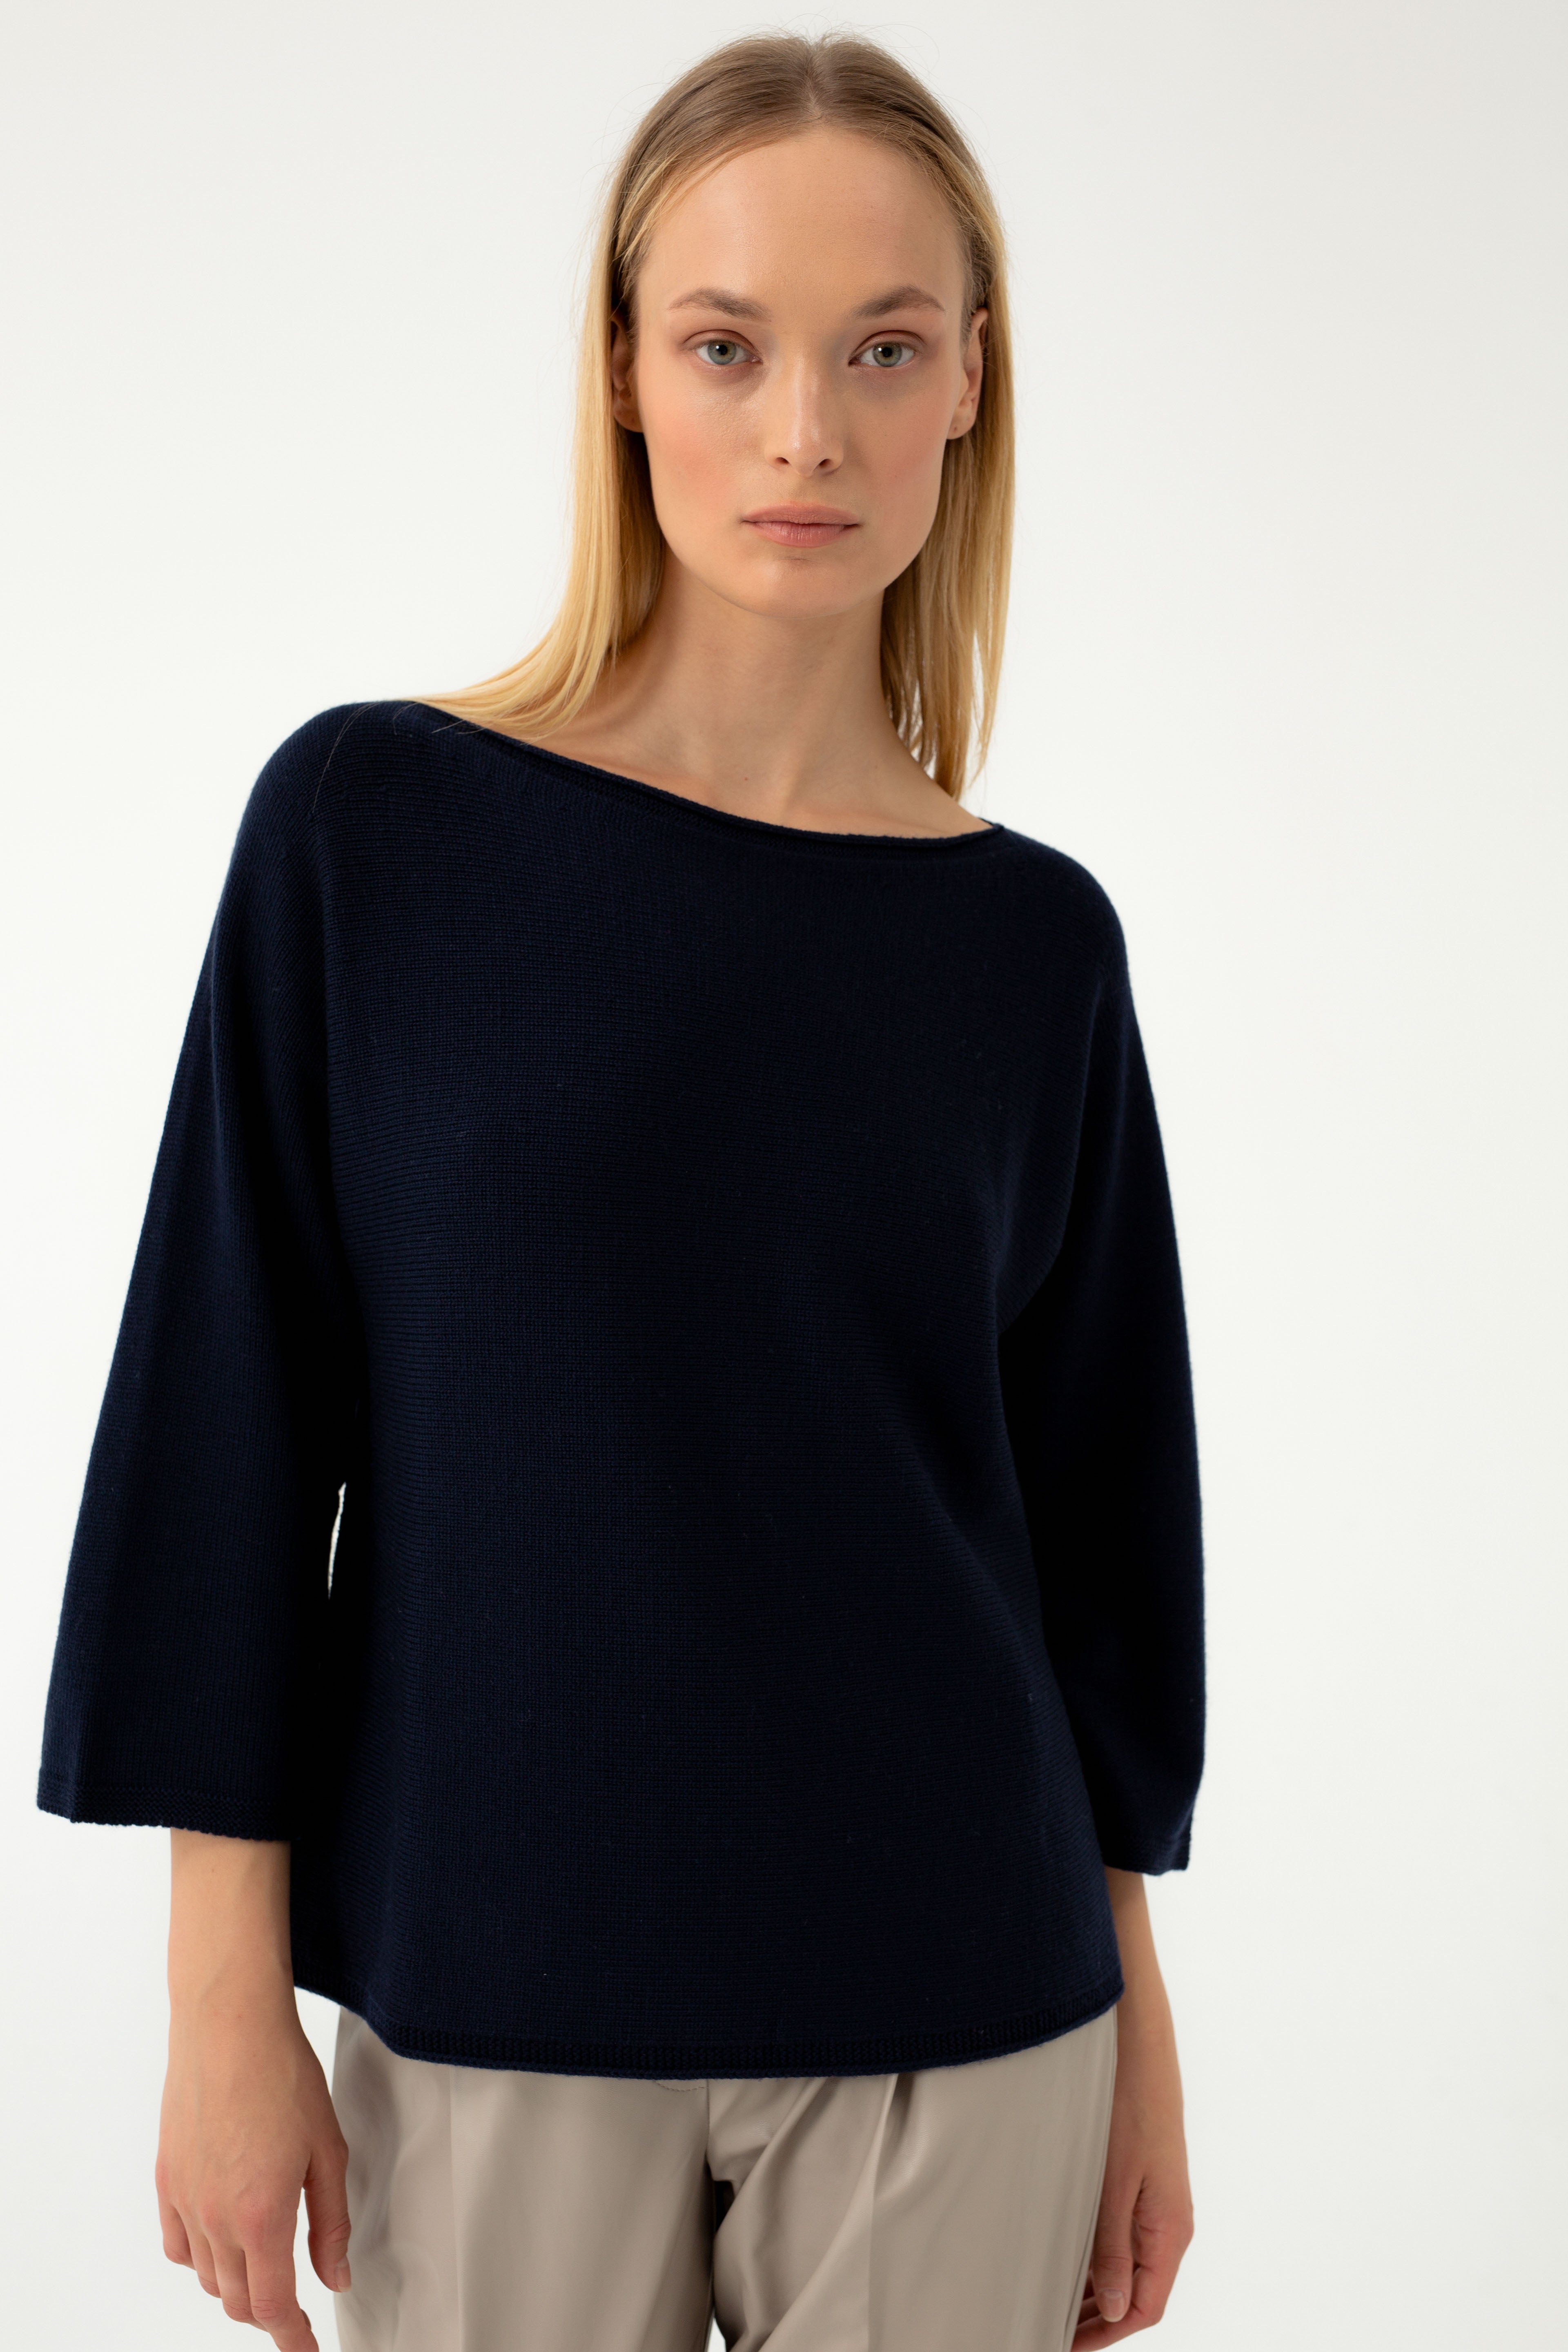 PURE WOOL LOOSE FIT NAVY SWEATER